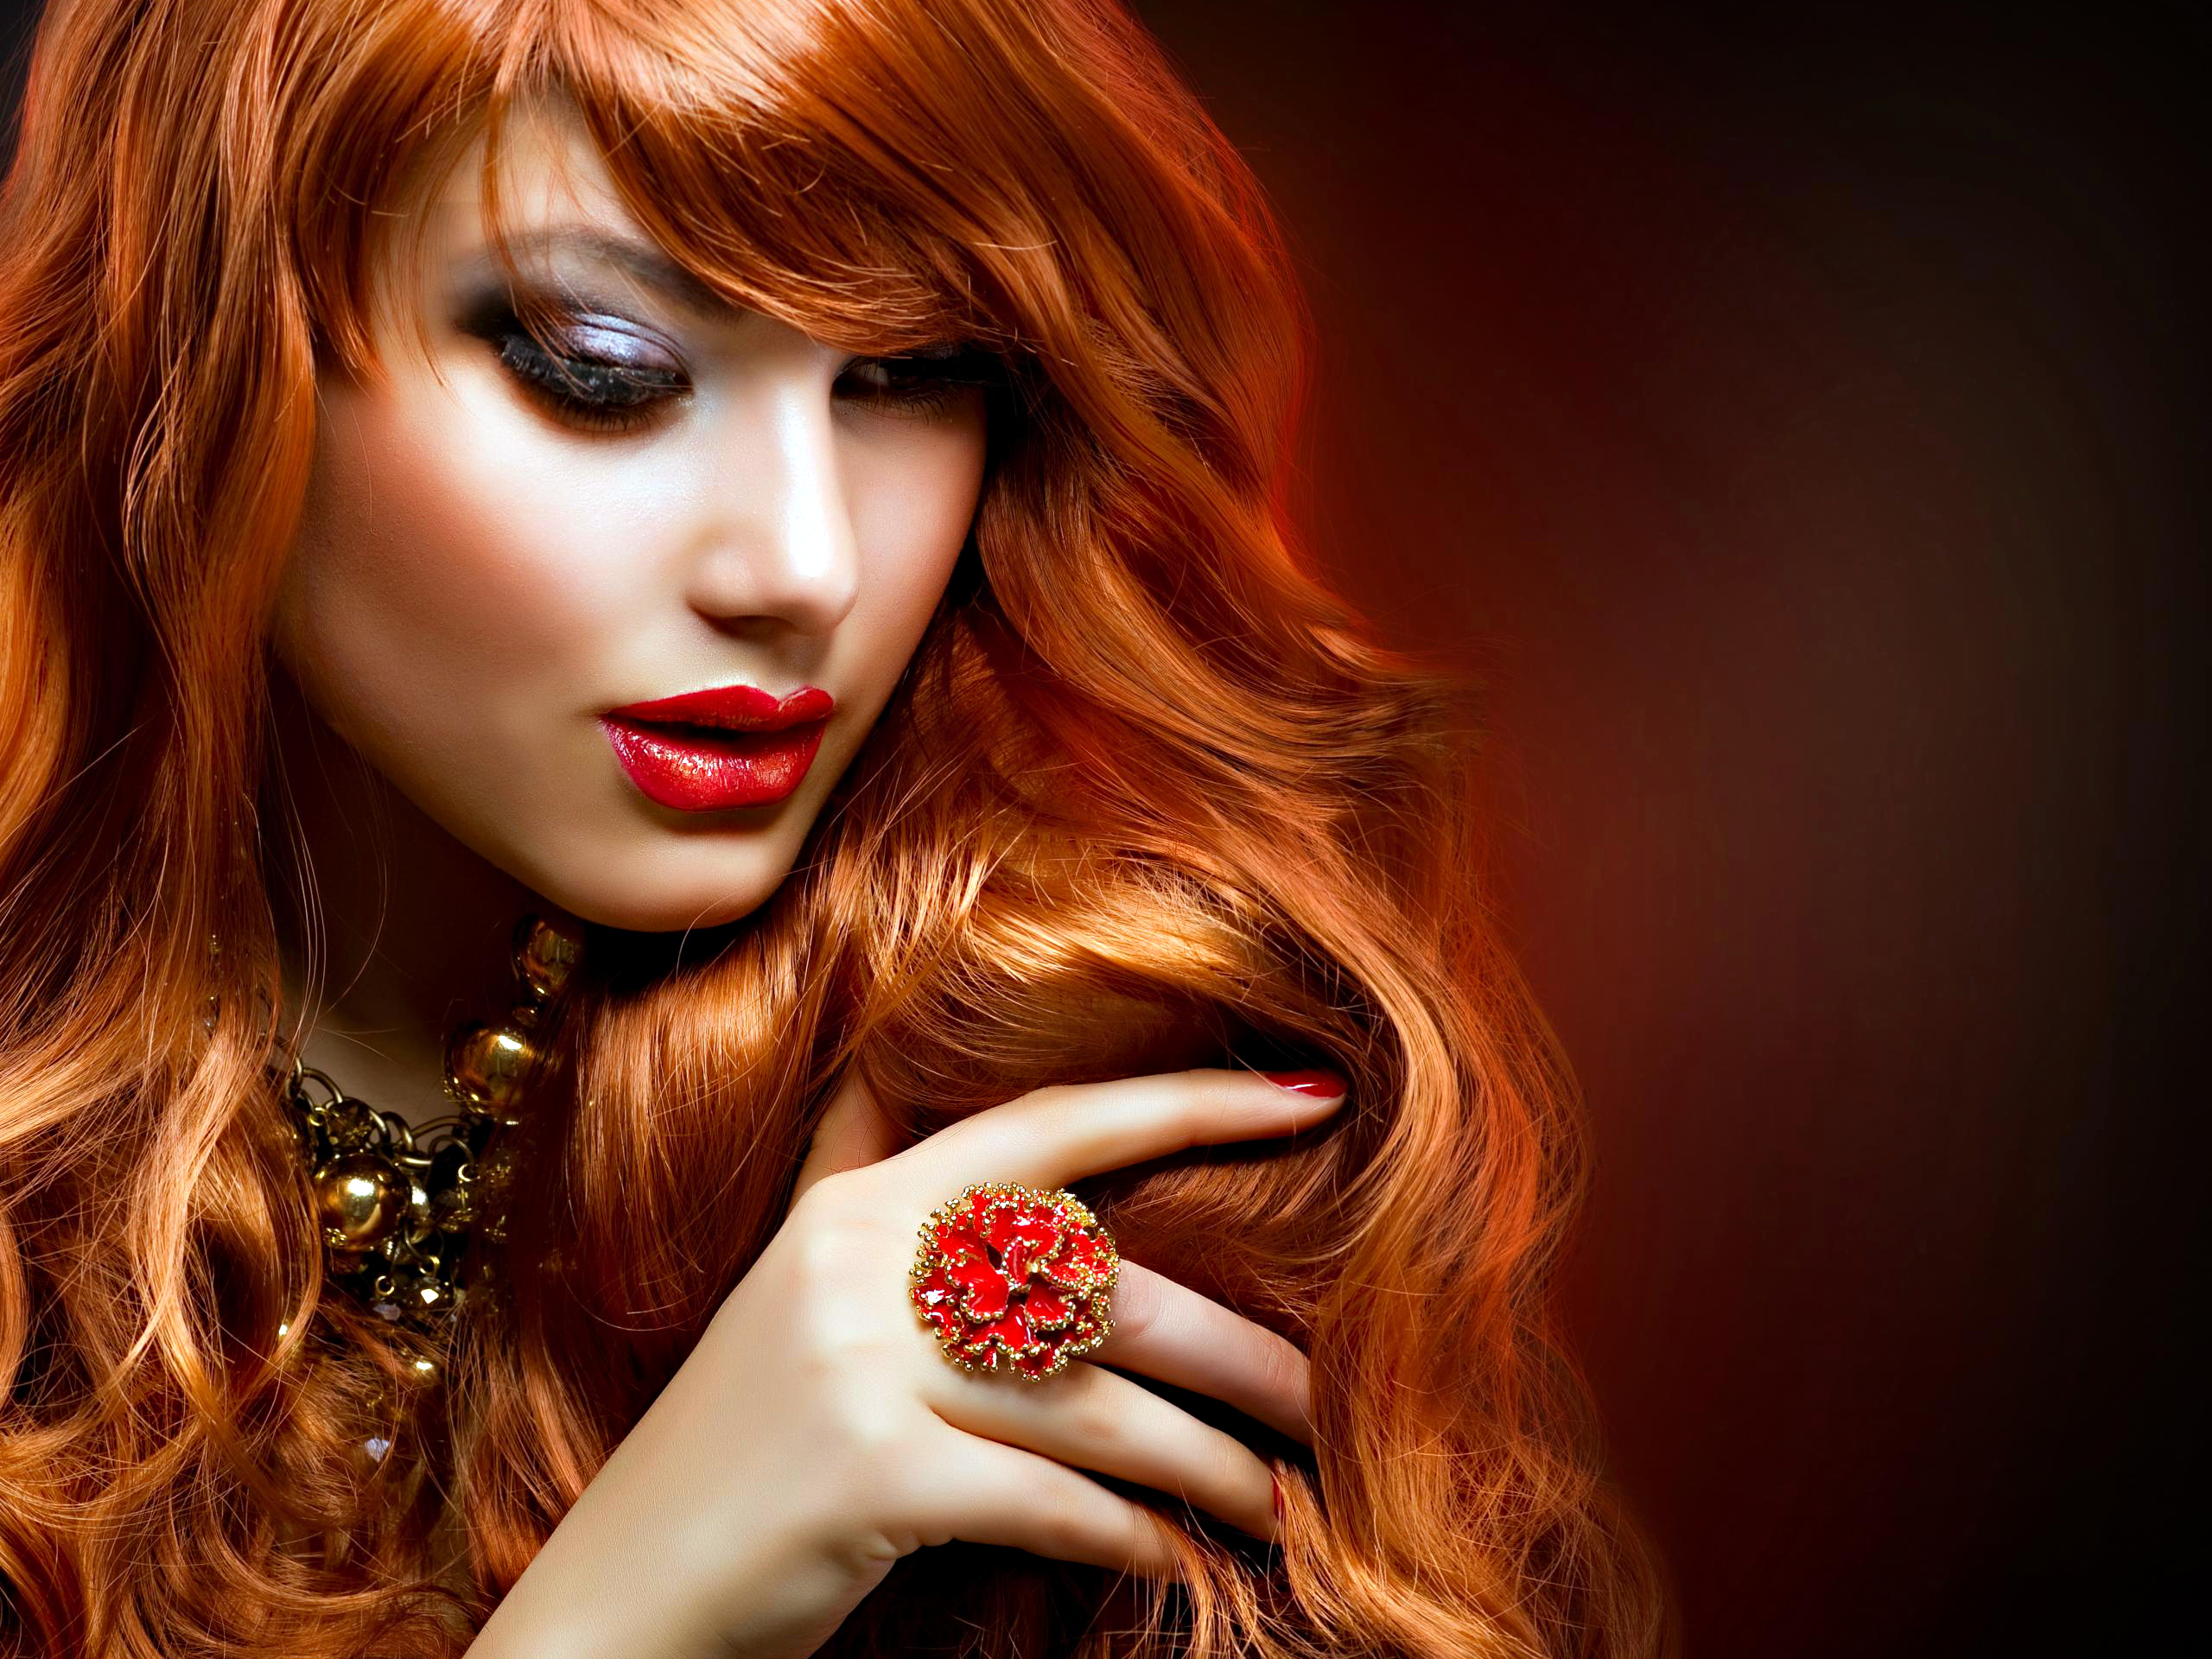 Beautiful Women Pictures and Wallpapers - The WoW Style